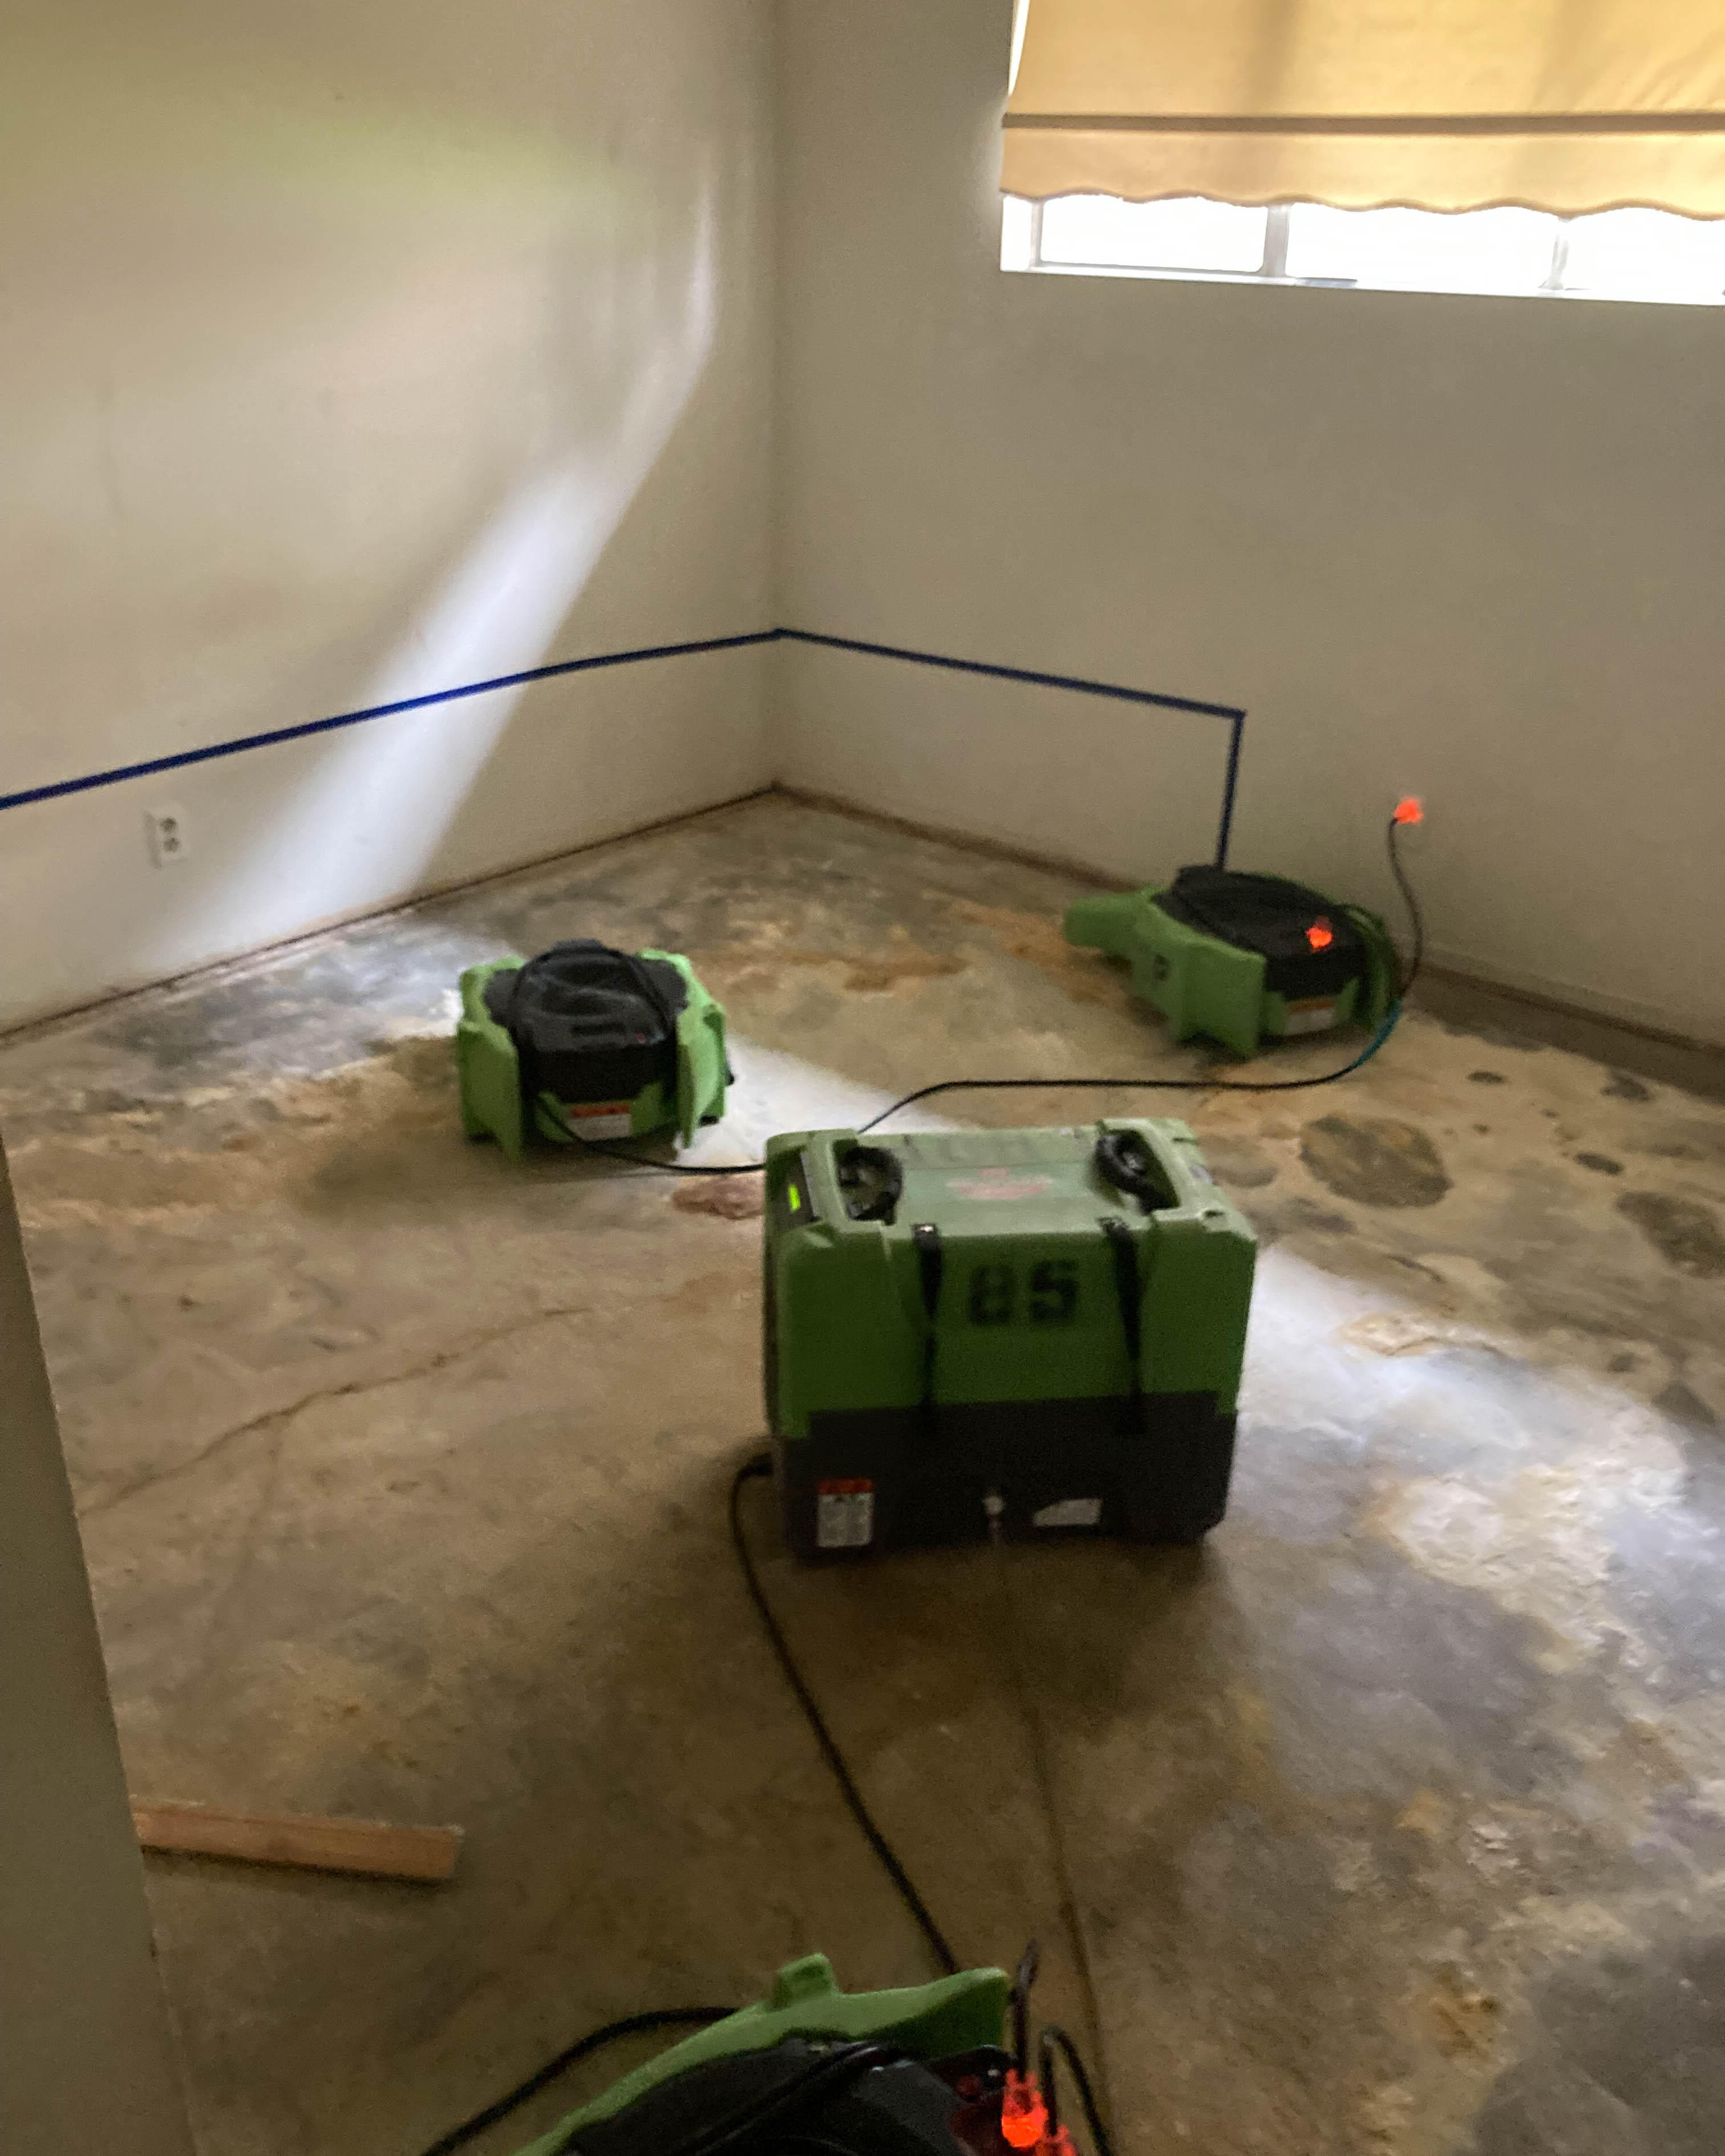 SERVPRO of Anaheim West offers 24-hour emergency water damage restoration services, regardless of the time of day or night. We can quickly restore your property to its pre-loss condition.